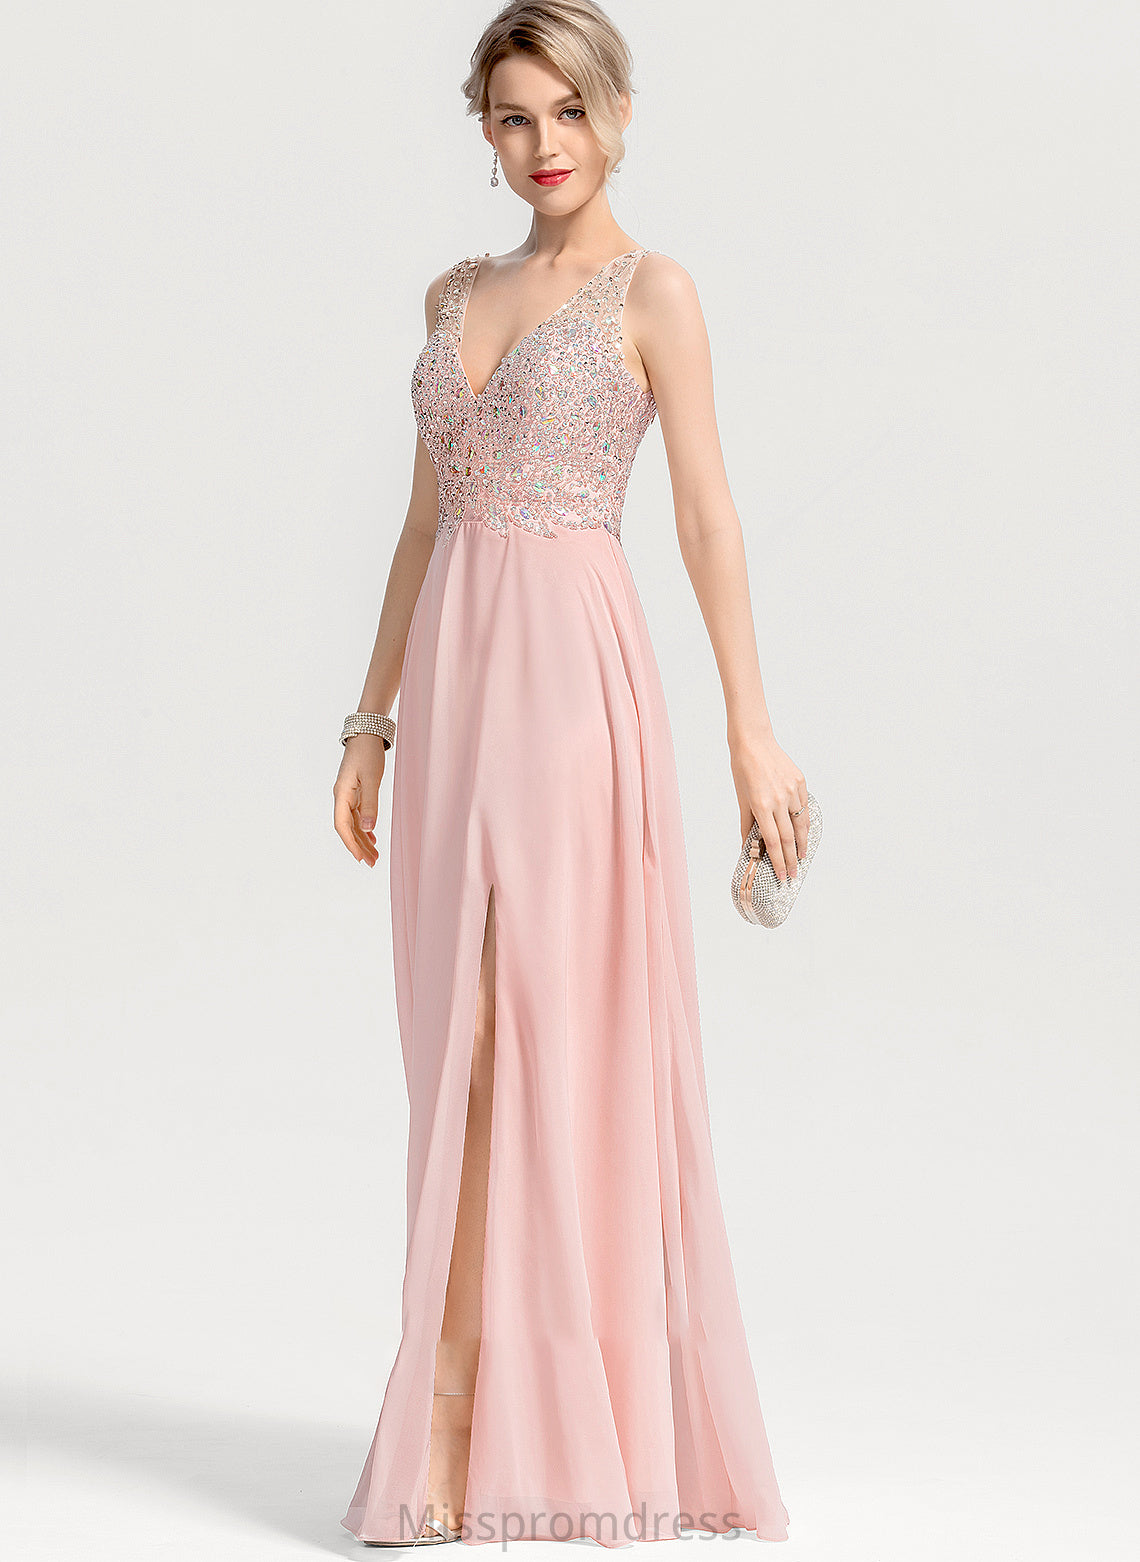 Chiffon Lainey Front A-Line Beading Prom Dresses Split V-neck Sequins Floor-Length With